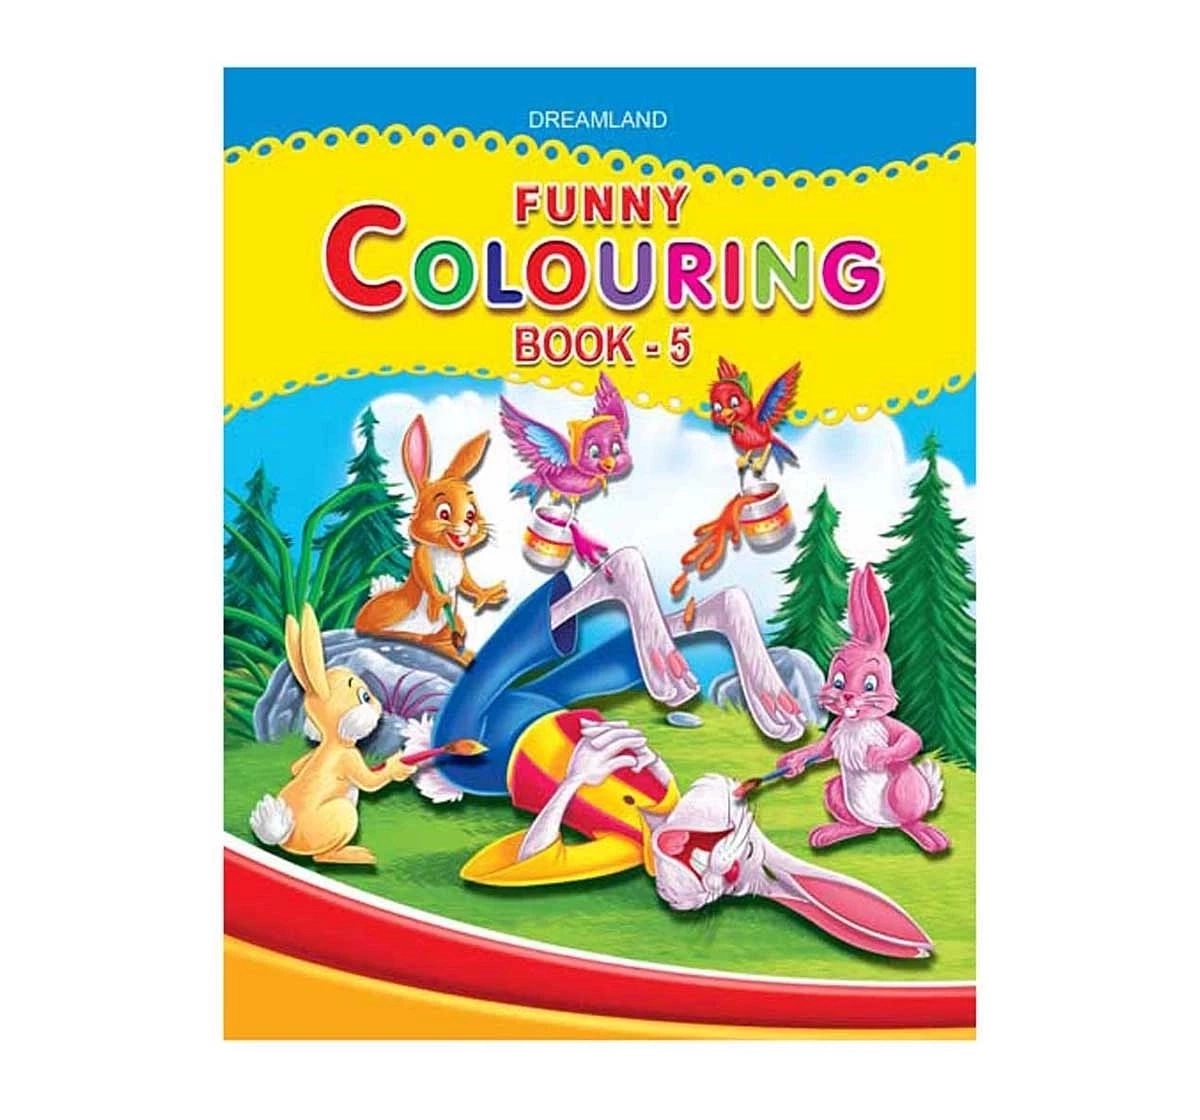 Dreamland Paper Back Funny Colouring Book Part 5 for kids 3Y+, Multicolour